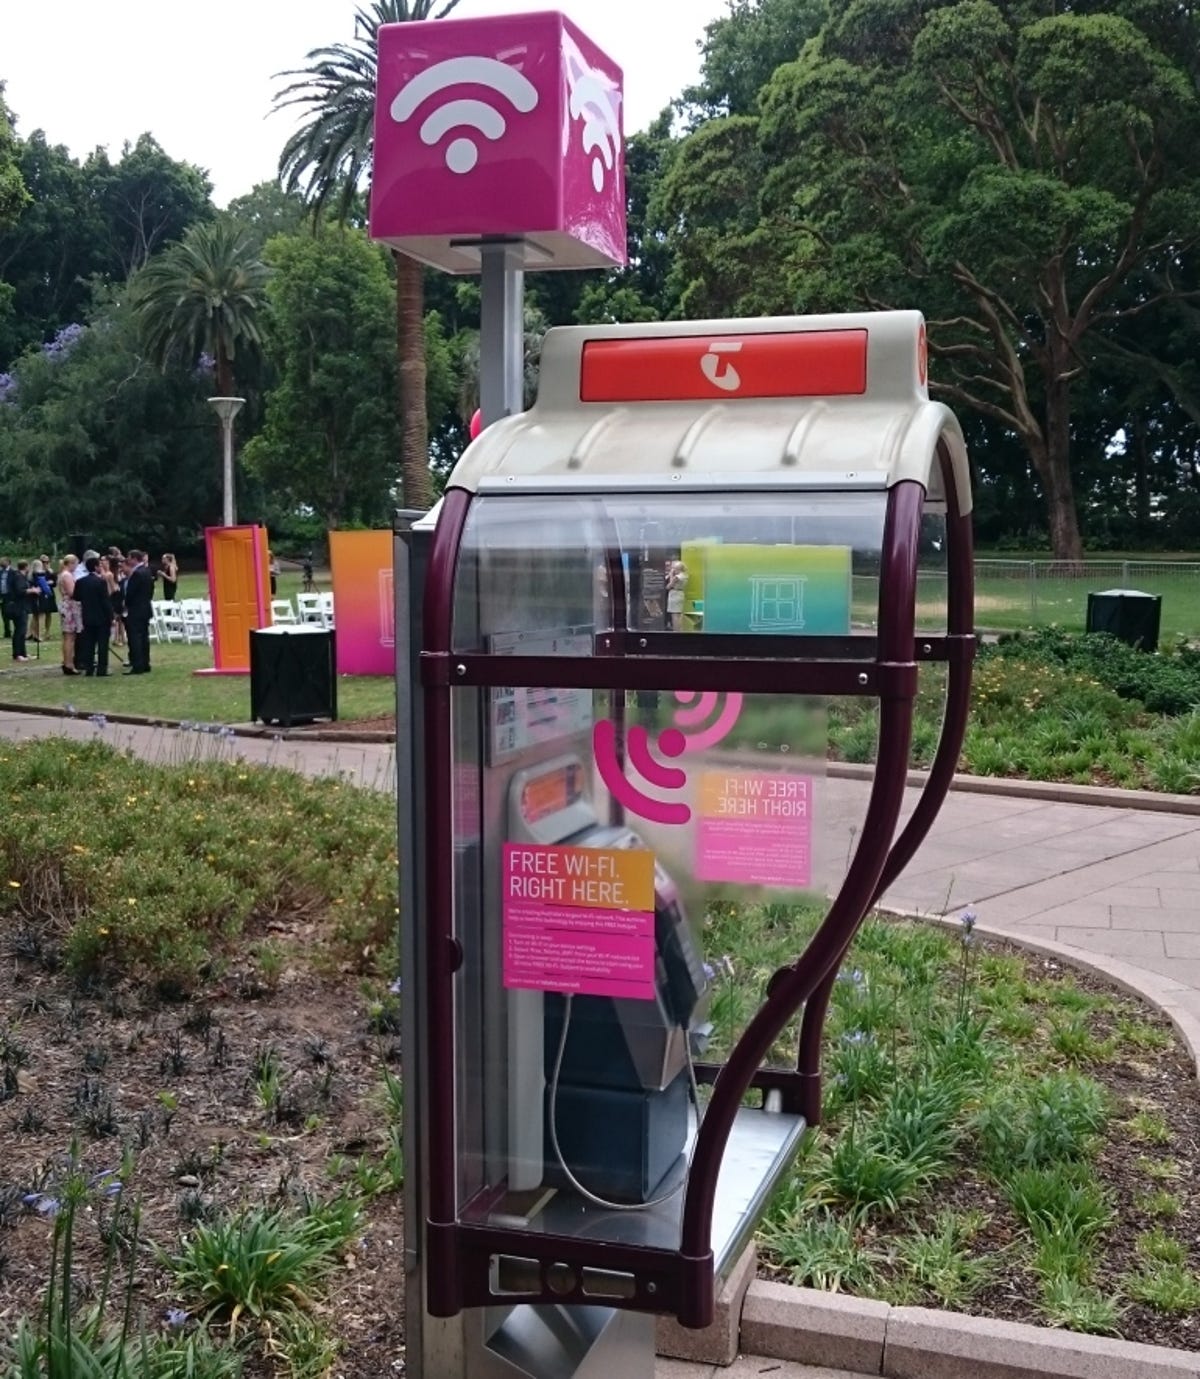 telstrapublicwifiphonebooth.jpg